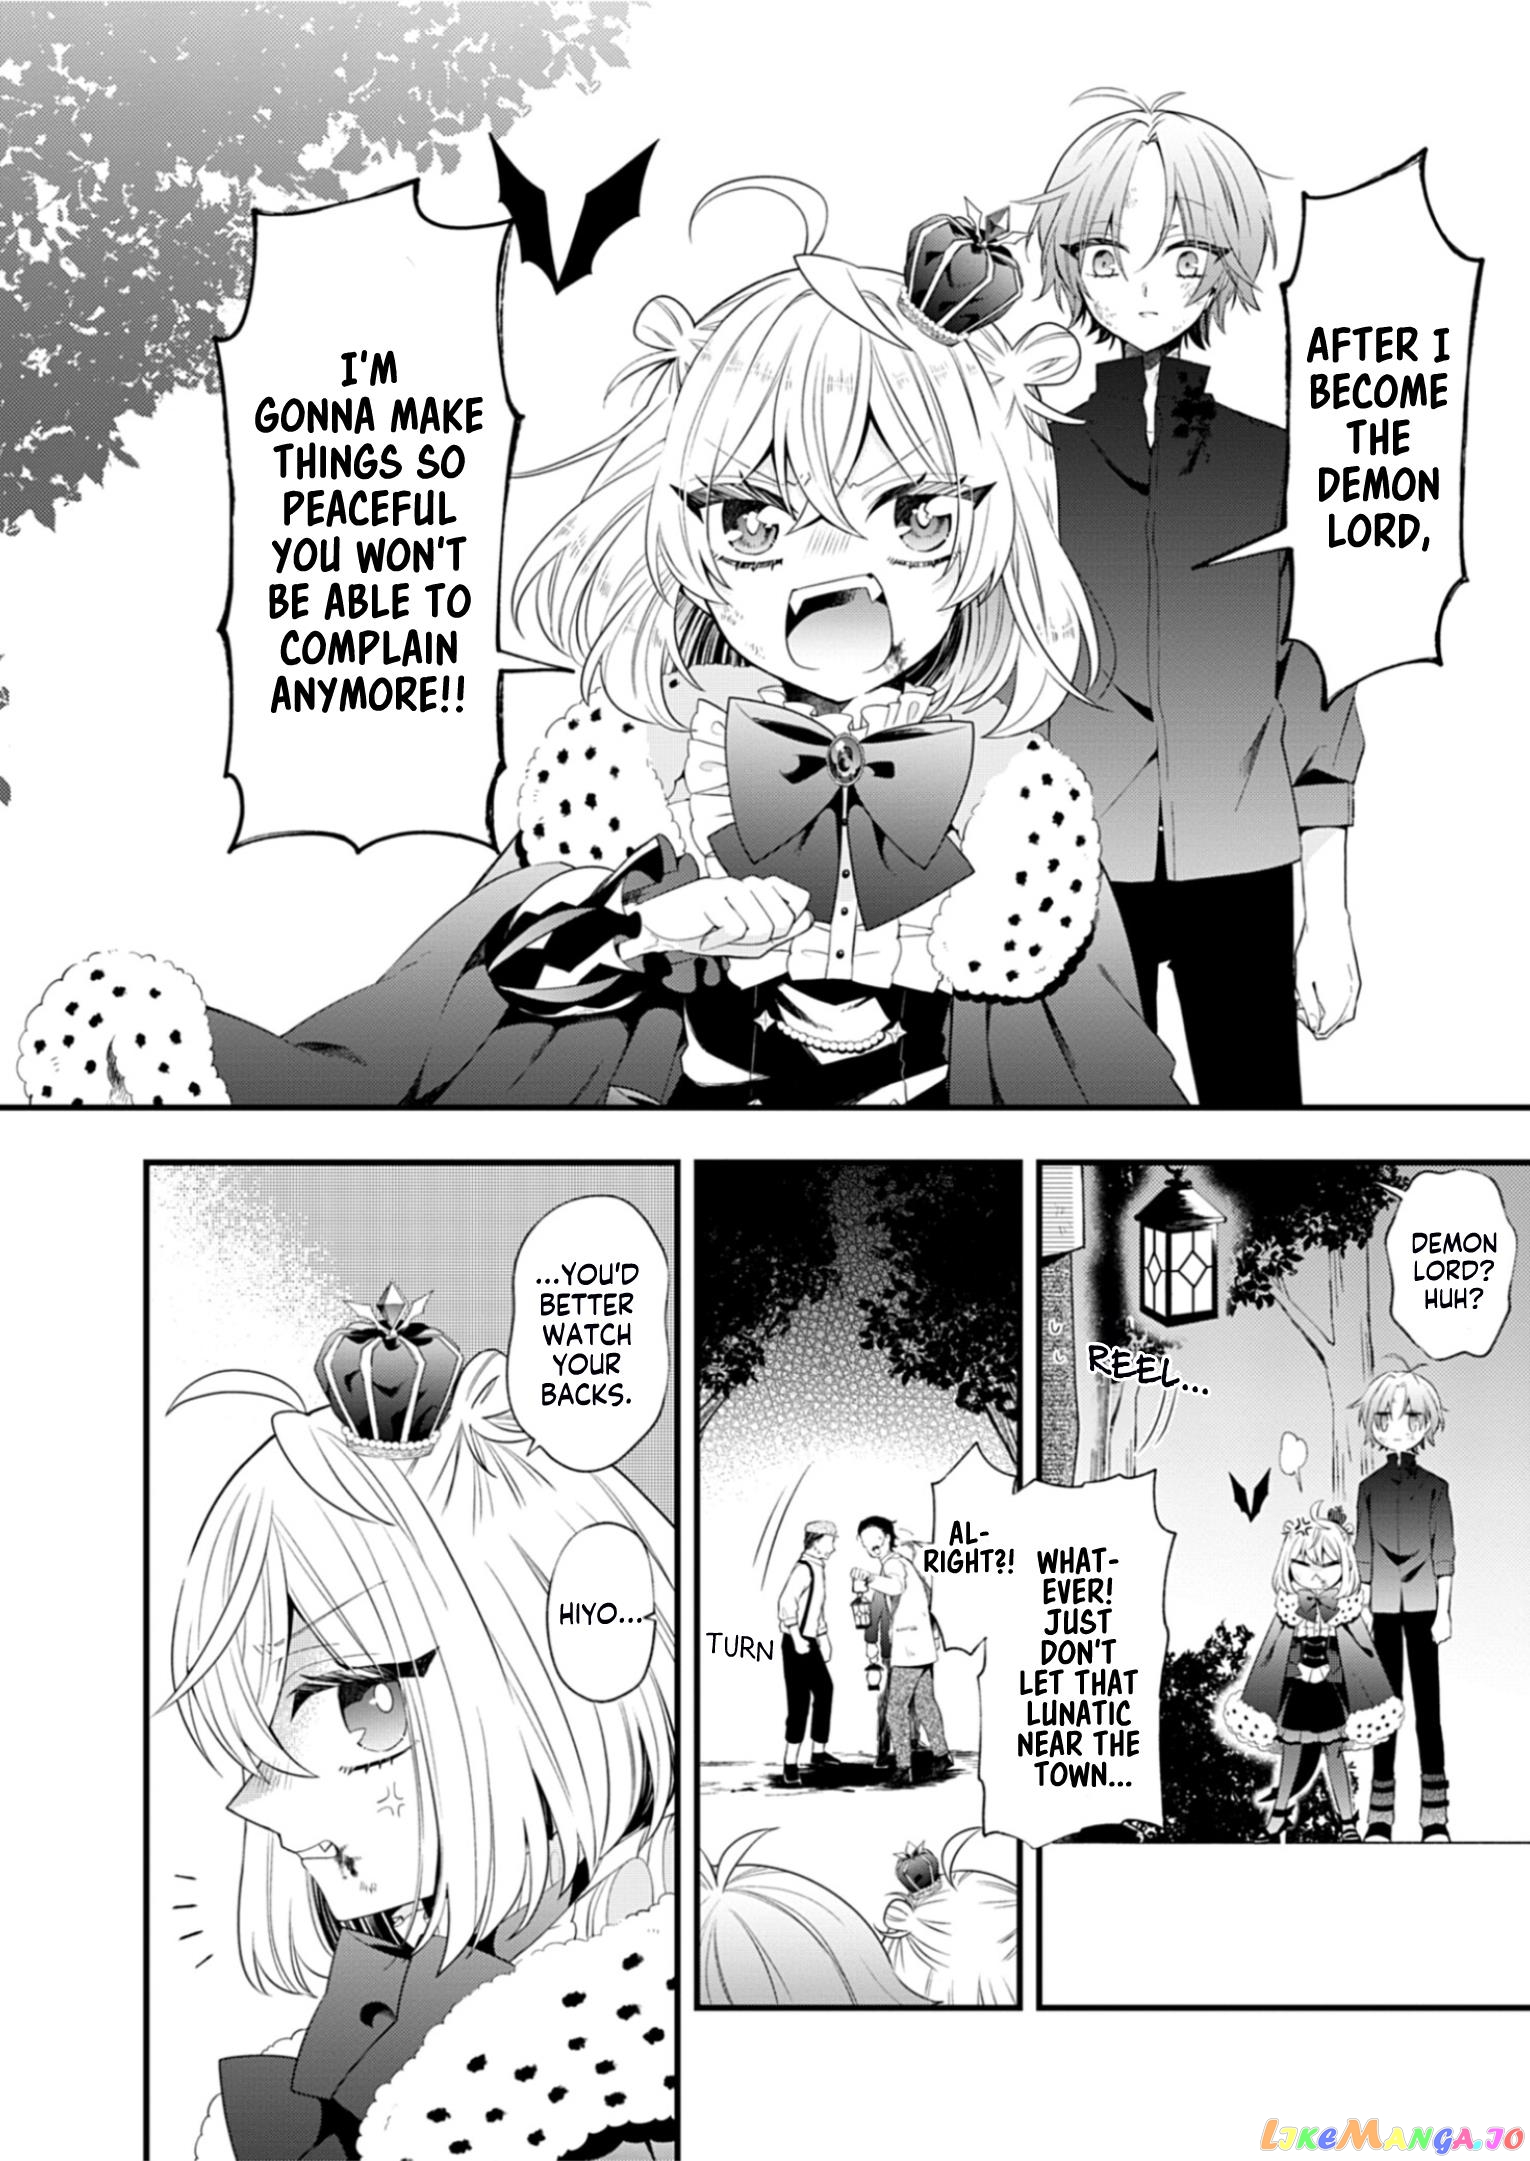 The Old Man That Was Reincarnated as a Young Girl in the Demon World Wants to Become the Demon Lord for the Sake of Peace chapter 2 - page 32